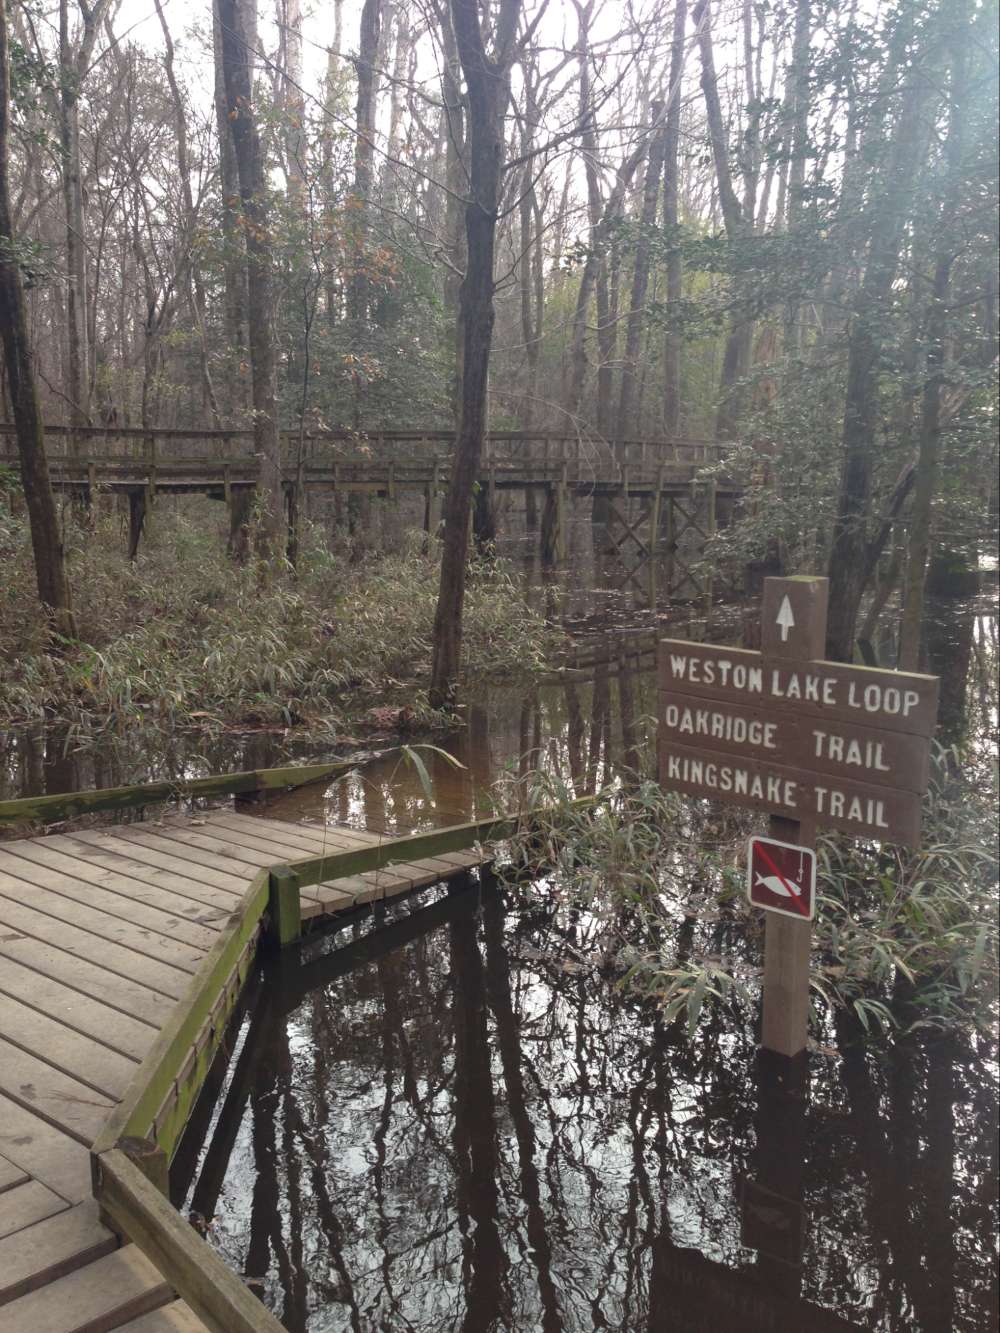 Take your camera and go on a photography walk at the Congaree National Park